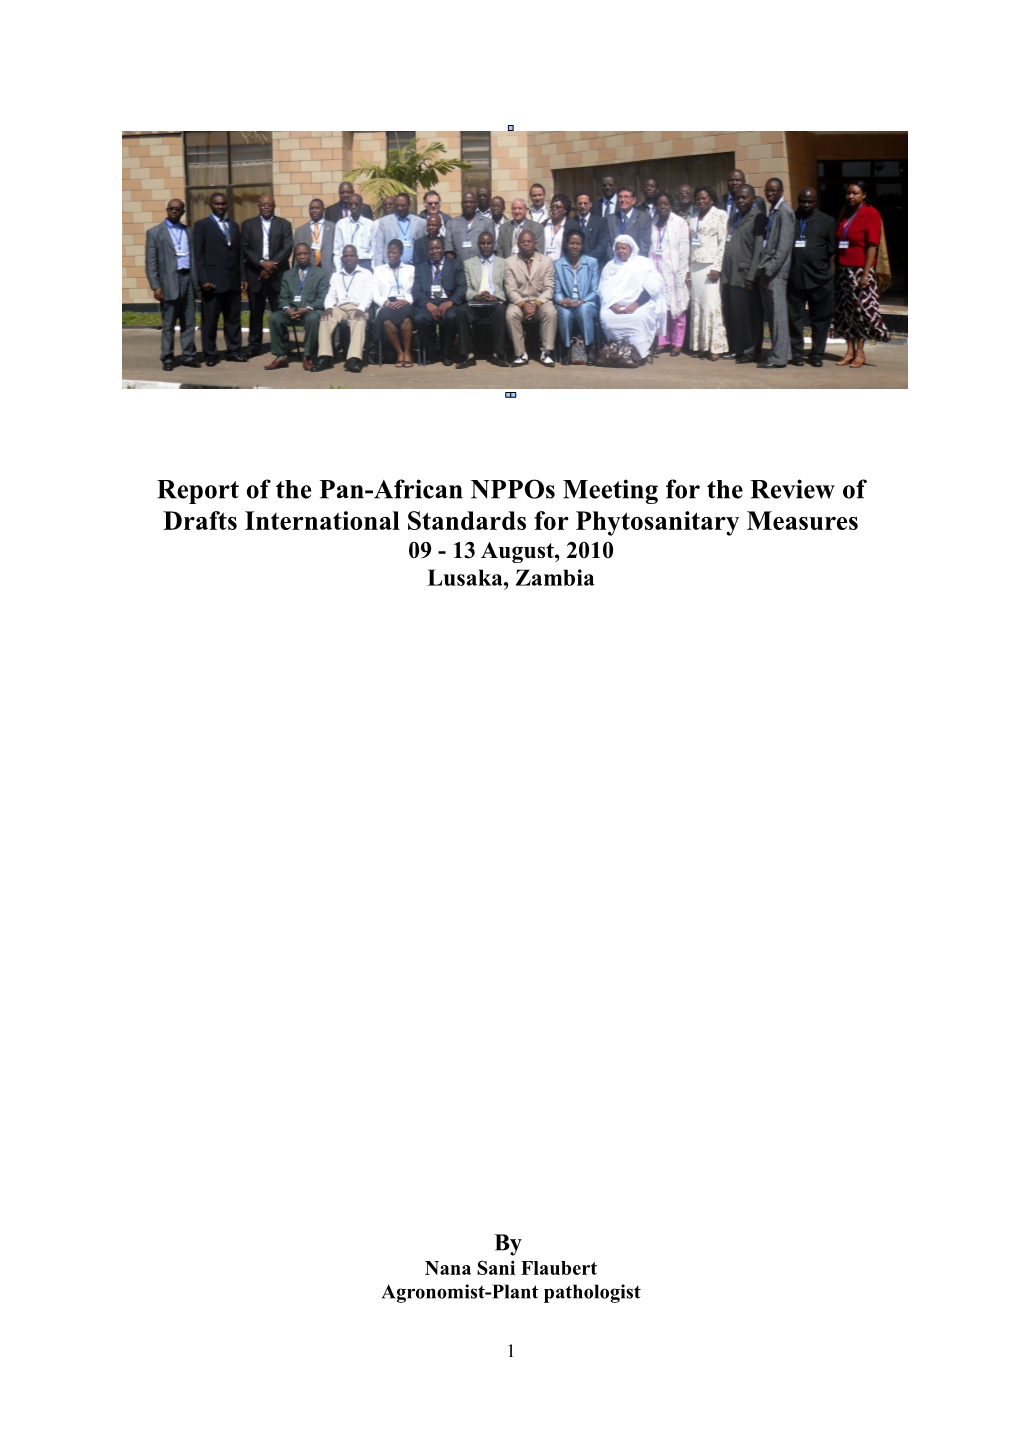 Report of the Pan-African Nppos Meeting for the Review of Drafts International Standards